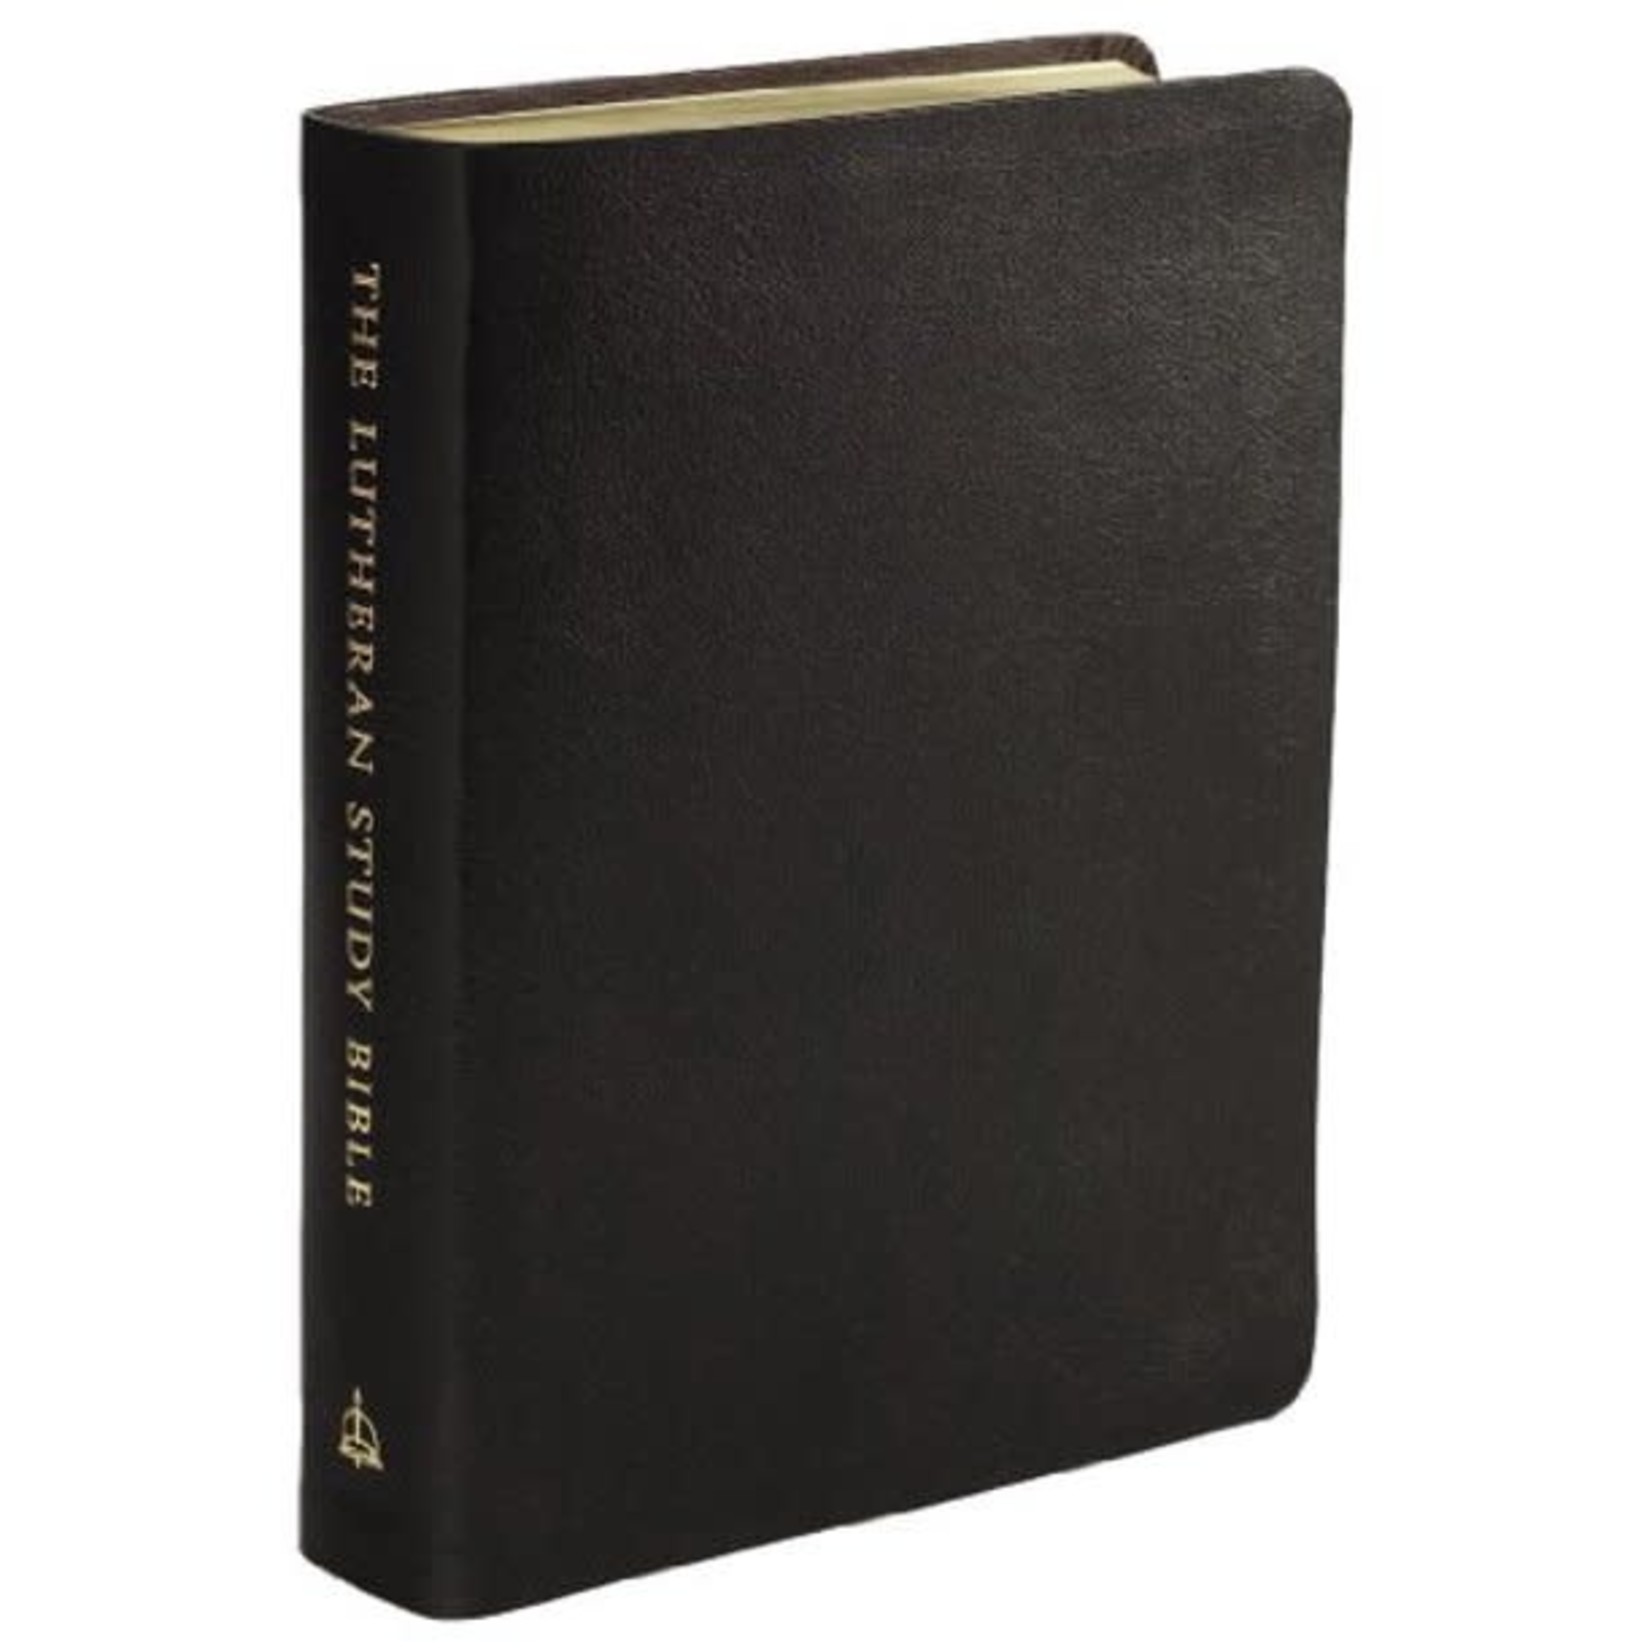 The Lutheran Study Bible (ESV) English Standard Version Black Bonded Leather Thumb Indexed [012041]